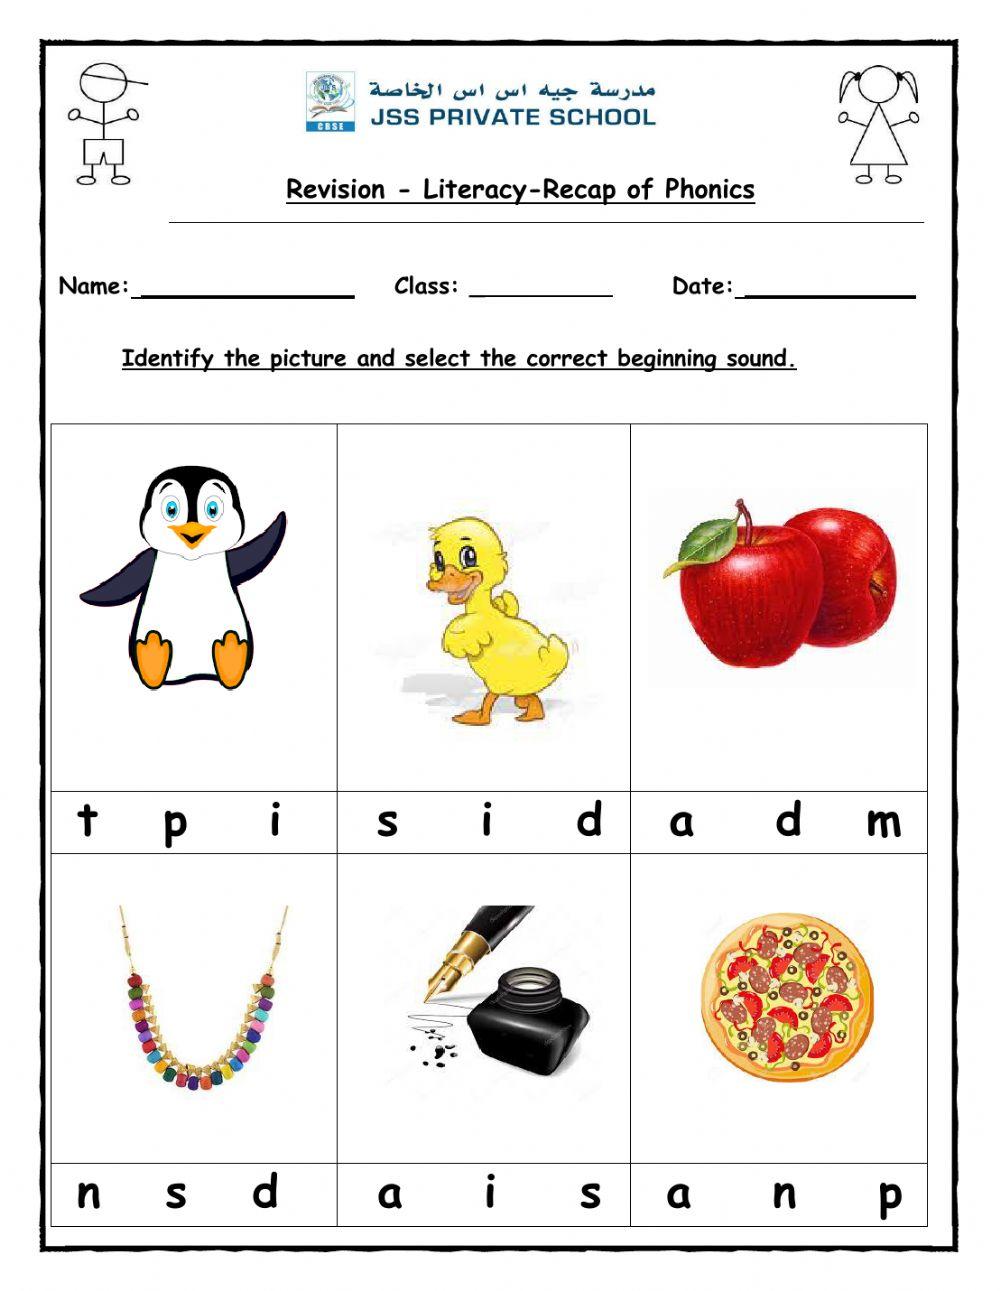 Revision - Recap of phonics - First sound